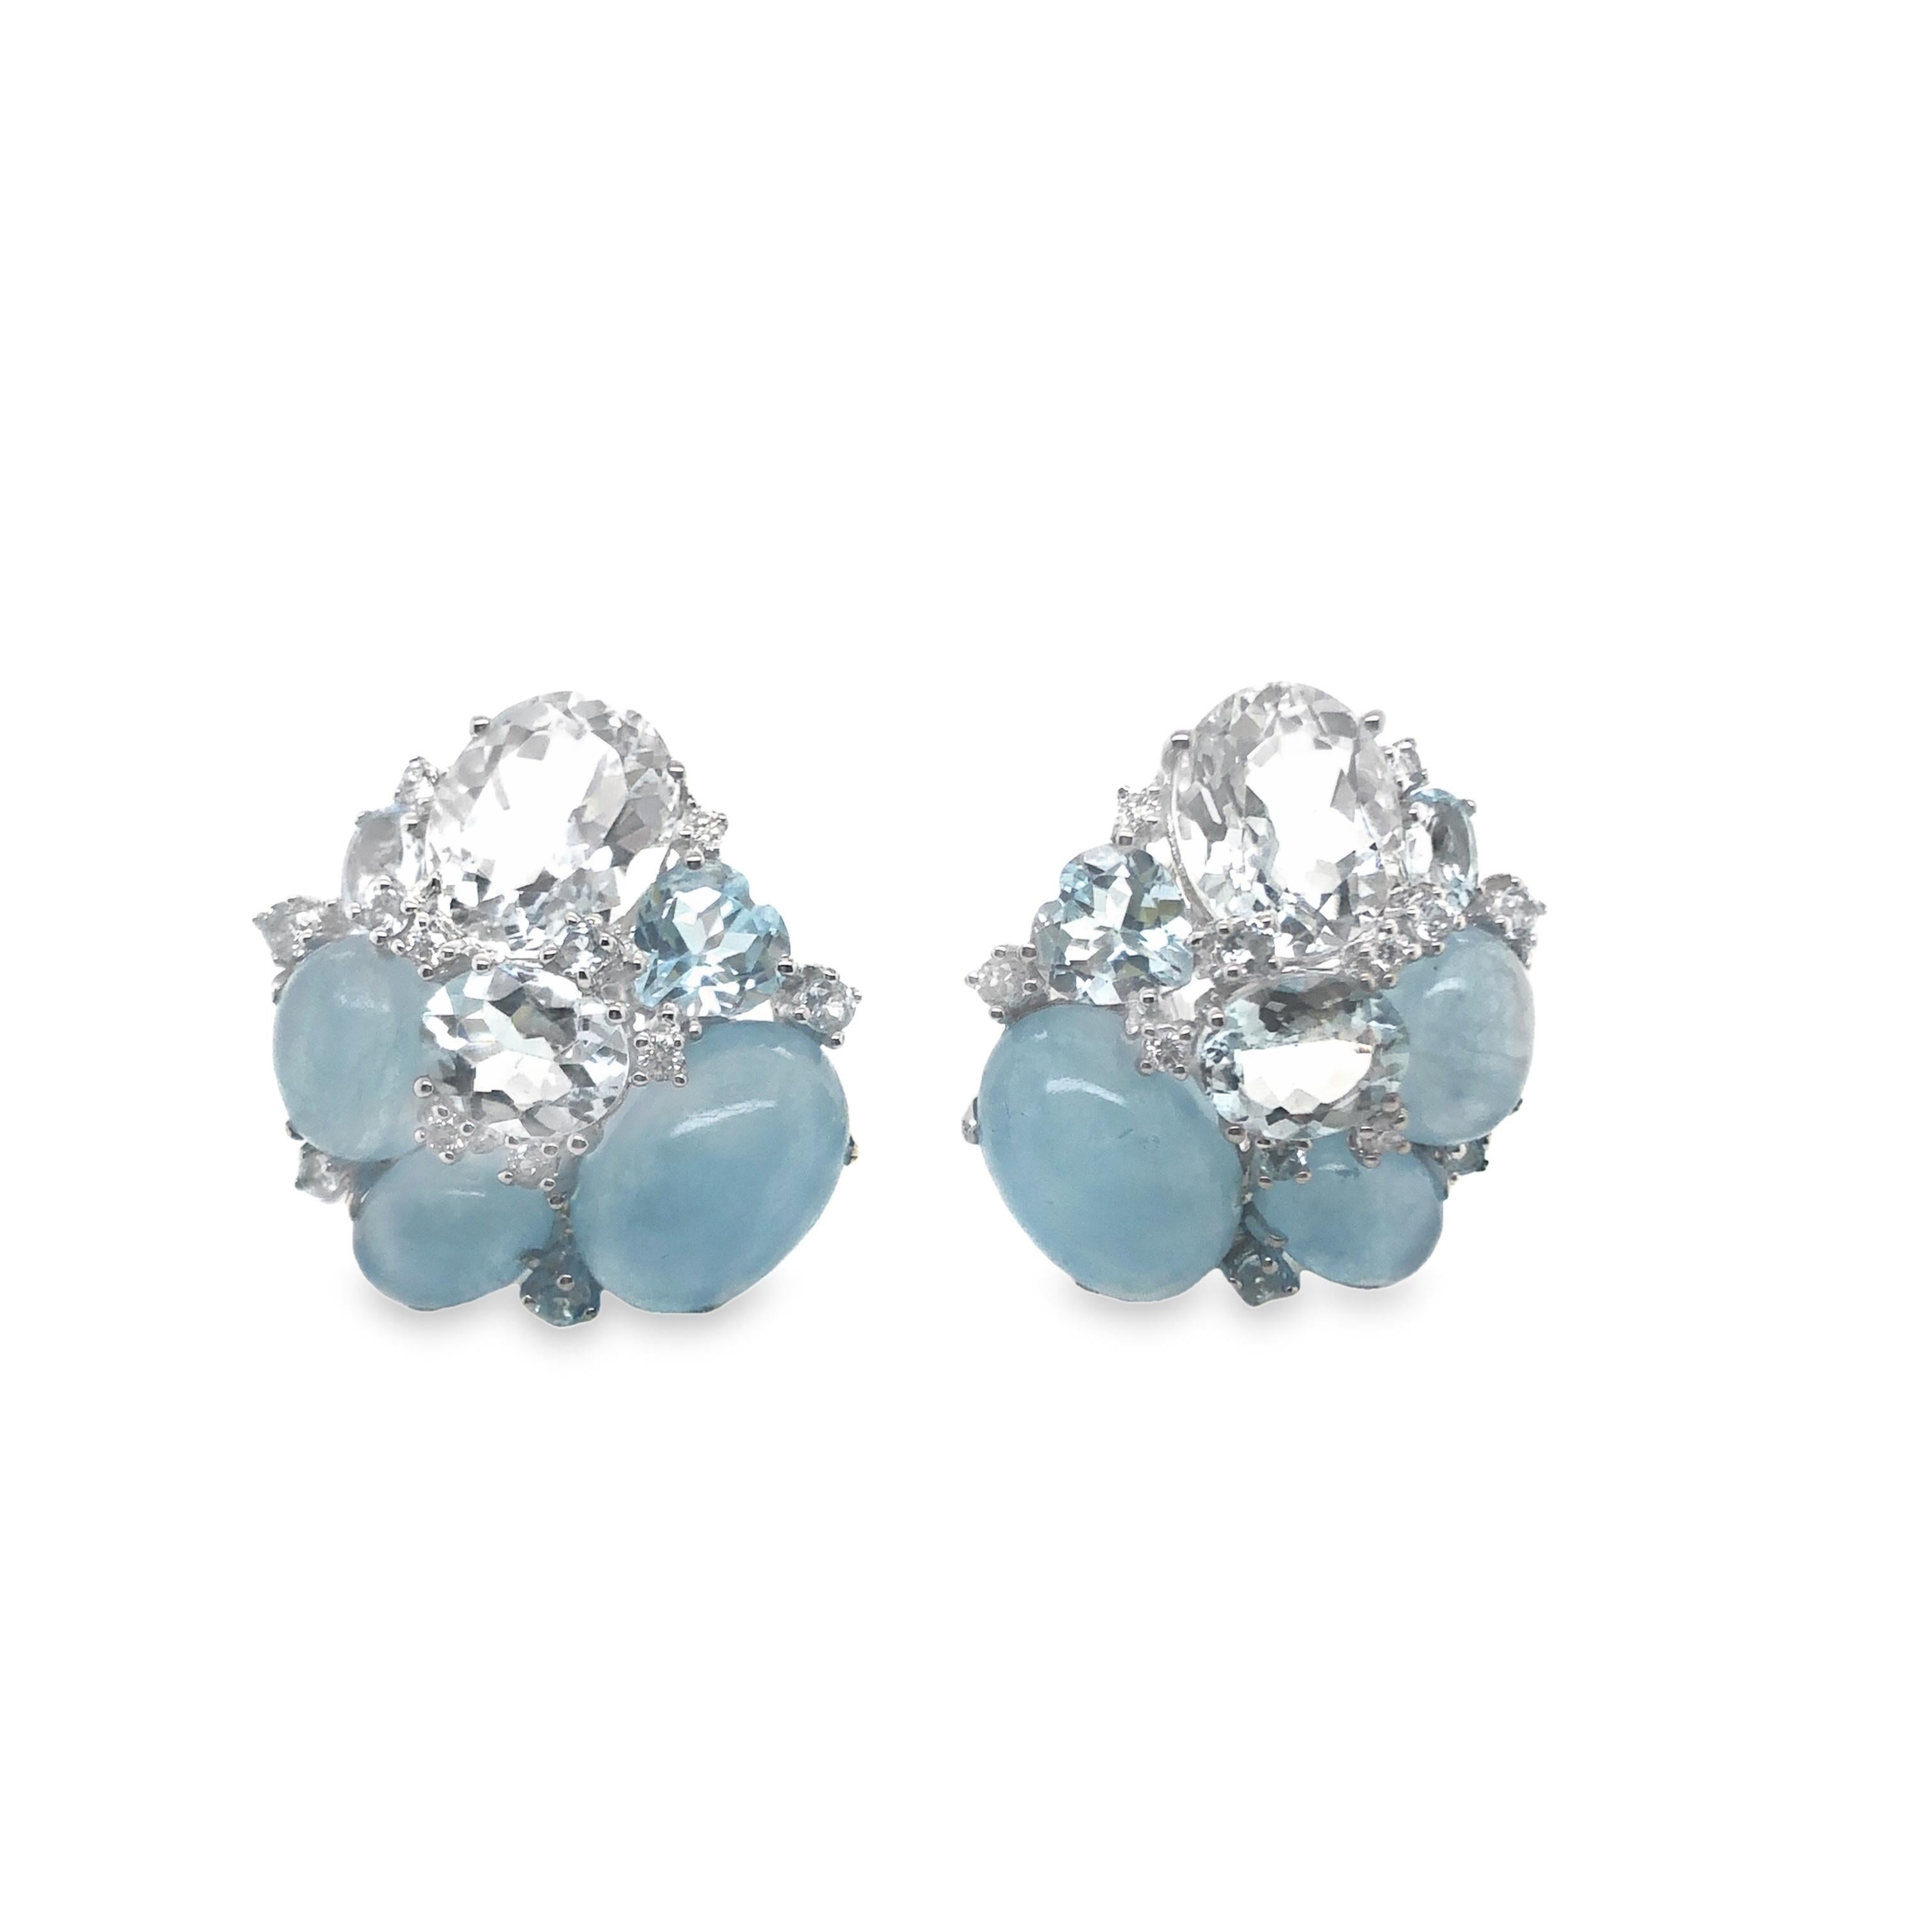 The 18KWG classic cluster ear clips feature a combination of oval cabochon and oval and heart-shaped faceted natural aquamarine stones accented with diamonds. This blend of gemstones creates a luxurious and eye-catching aesthetic that is perfect for